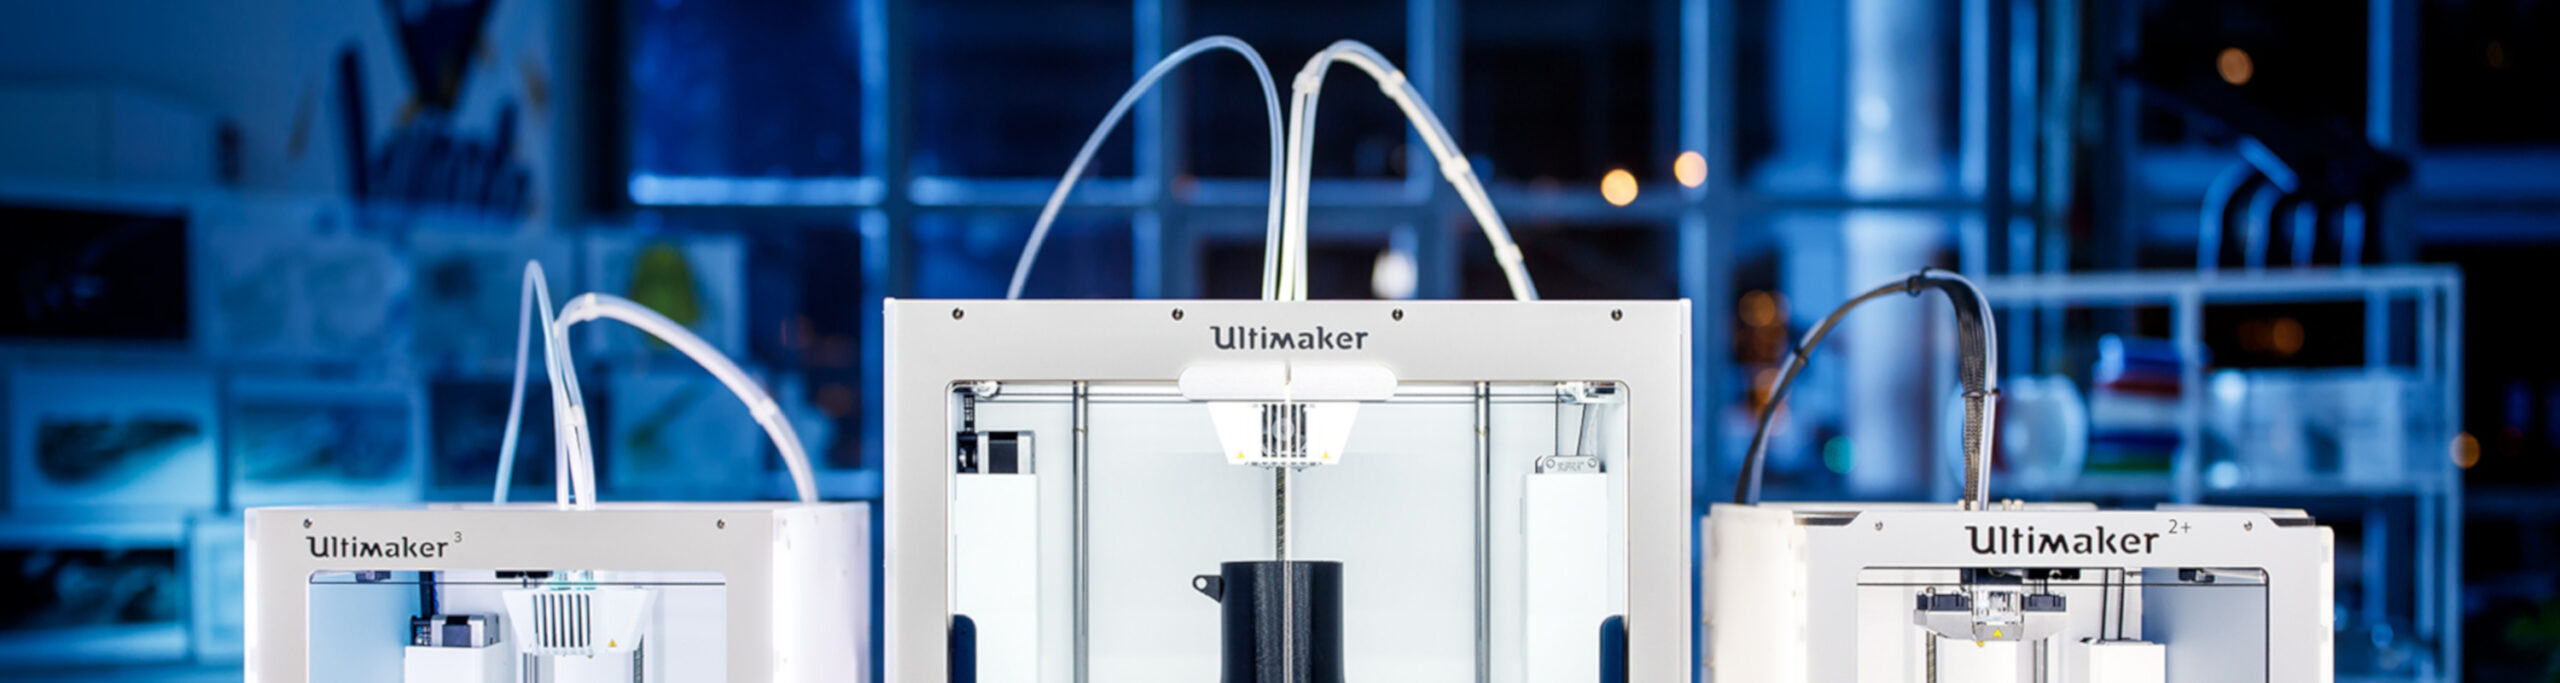 The Ultimaker S5